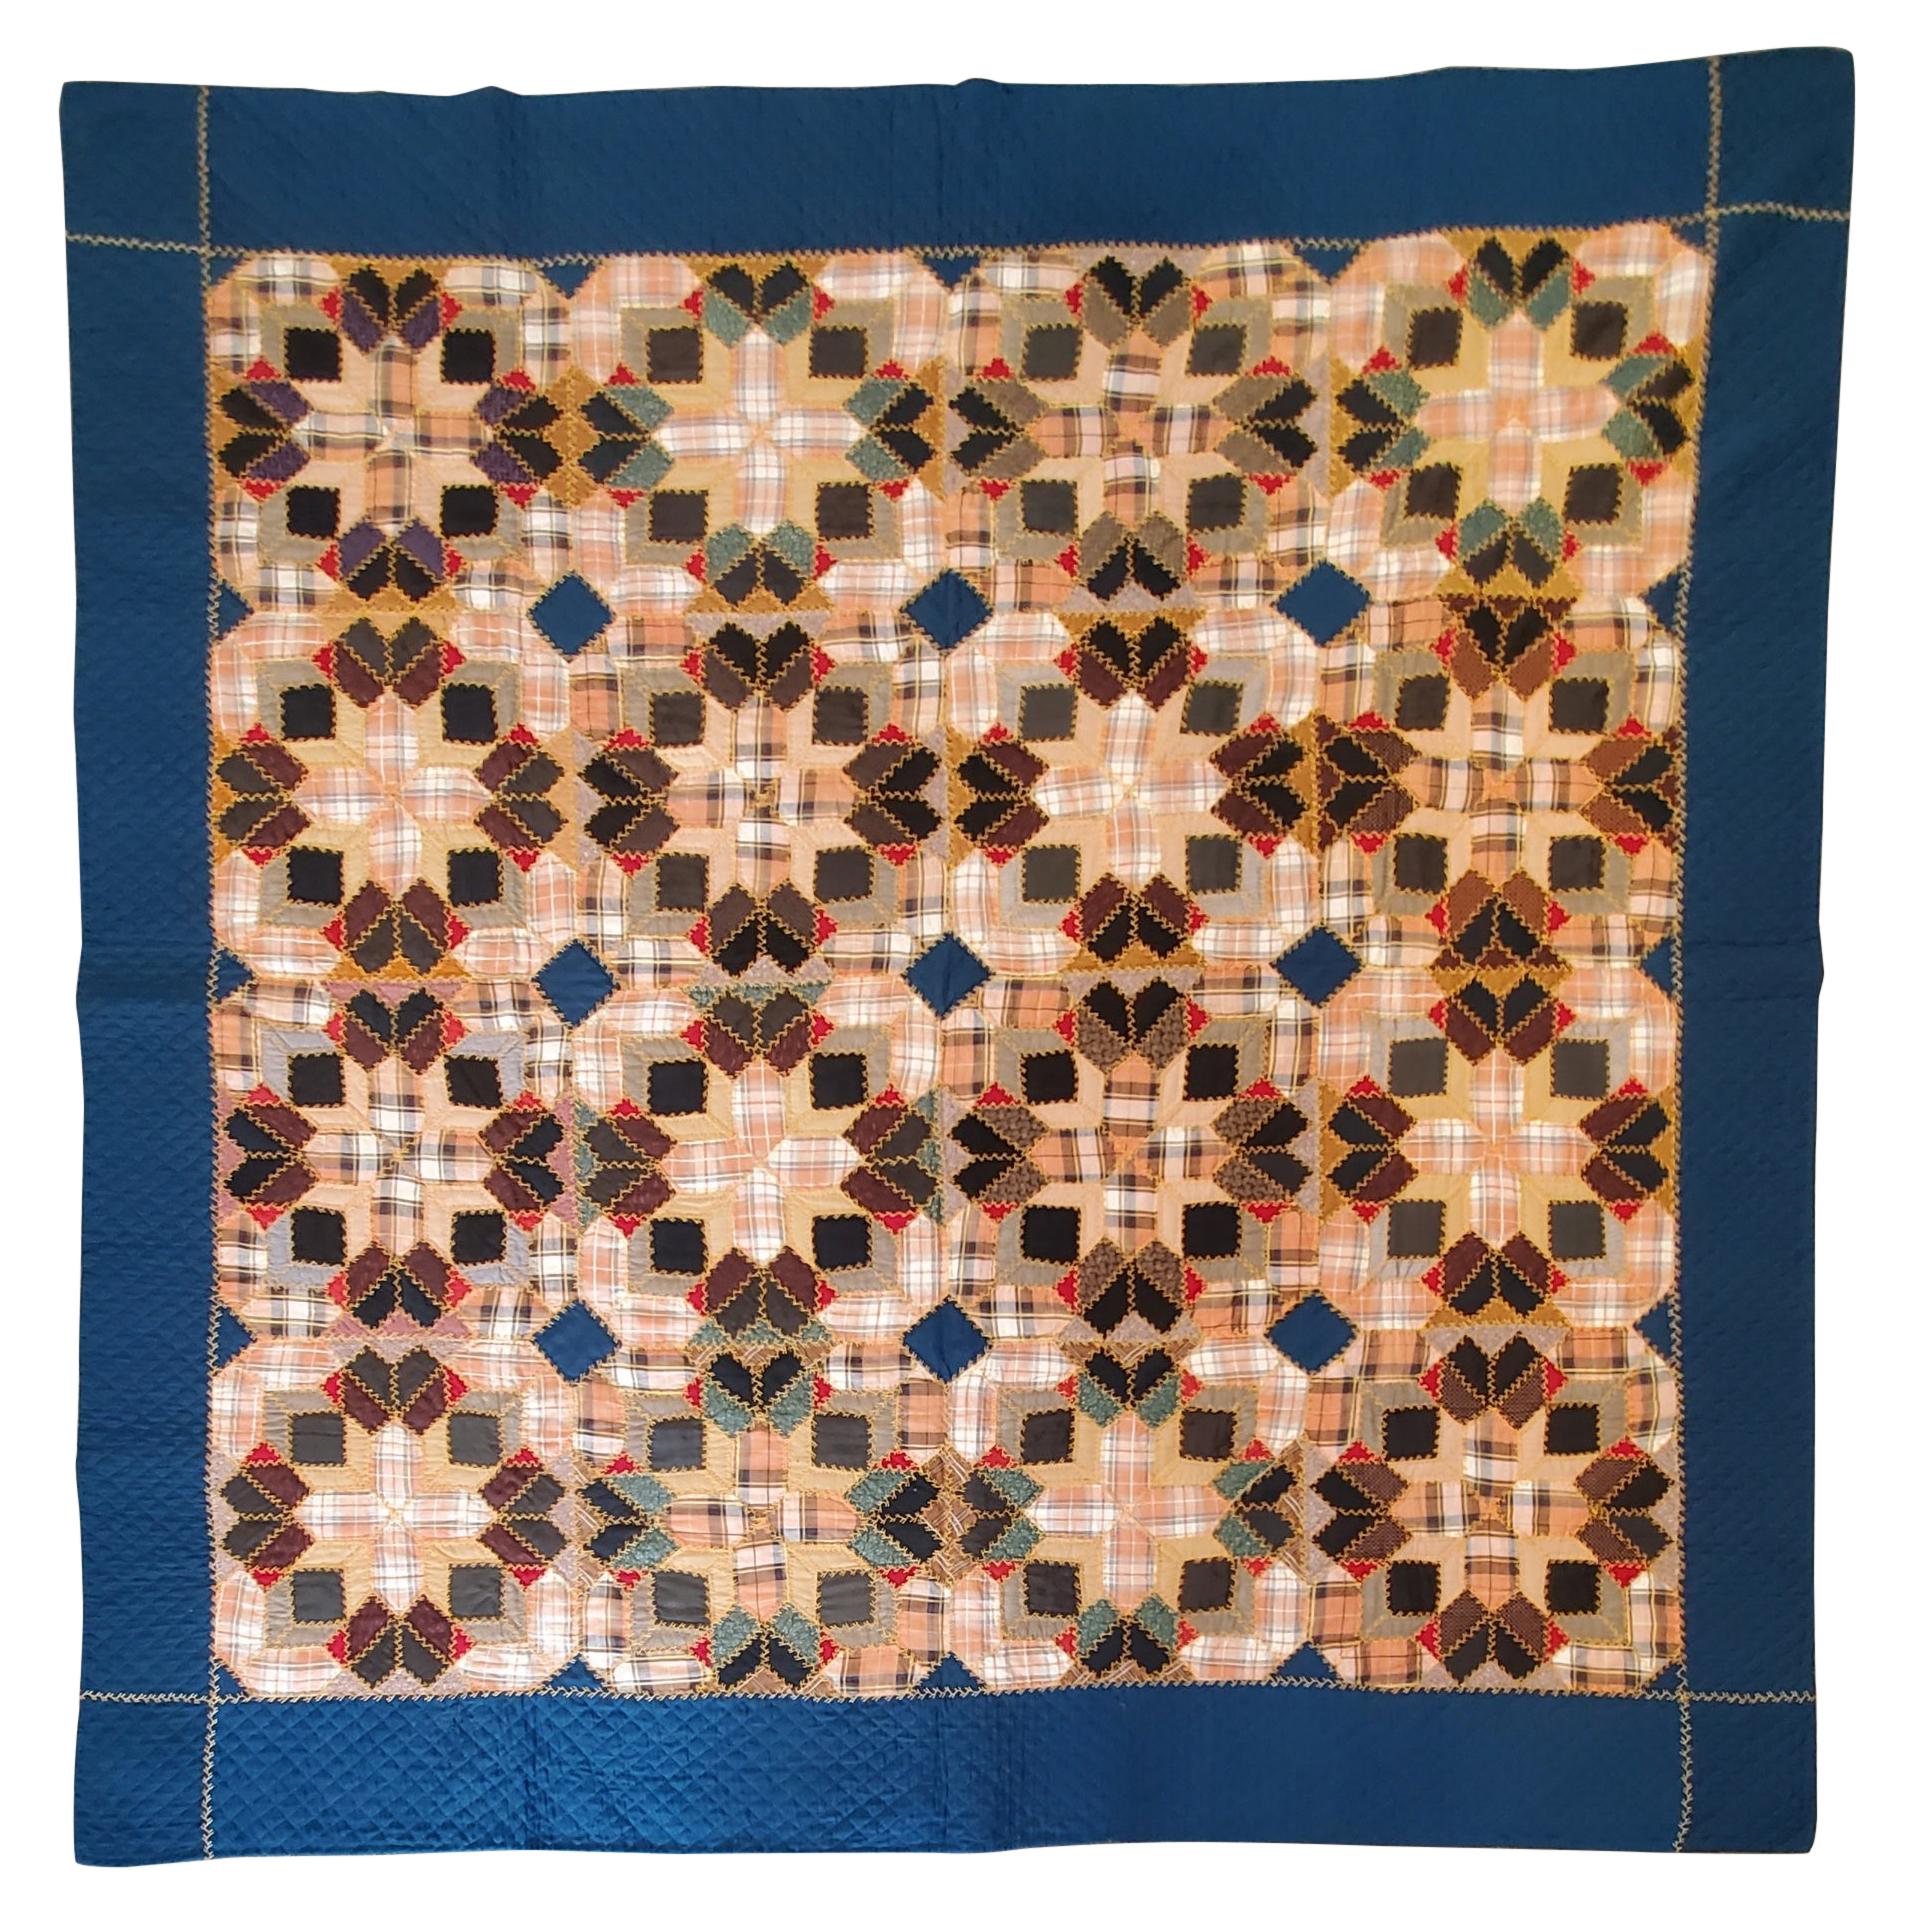 19thc Antique Quilt Mennonite Wool Stars with Embroidery